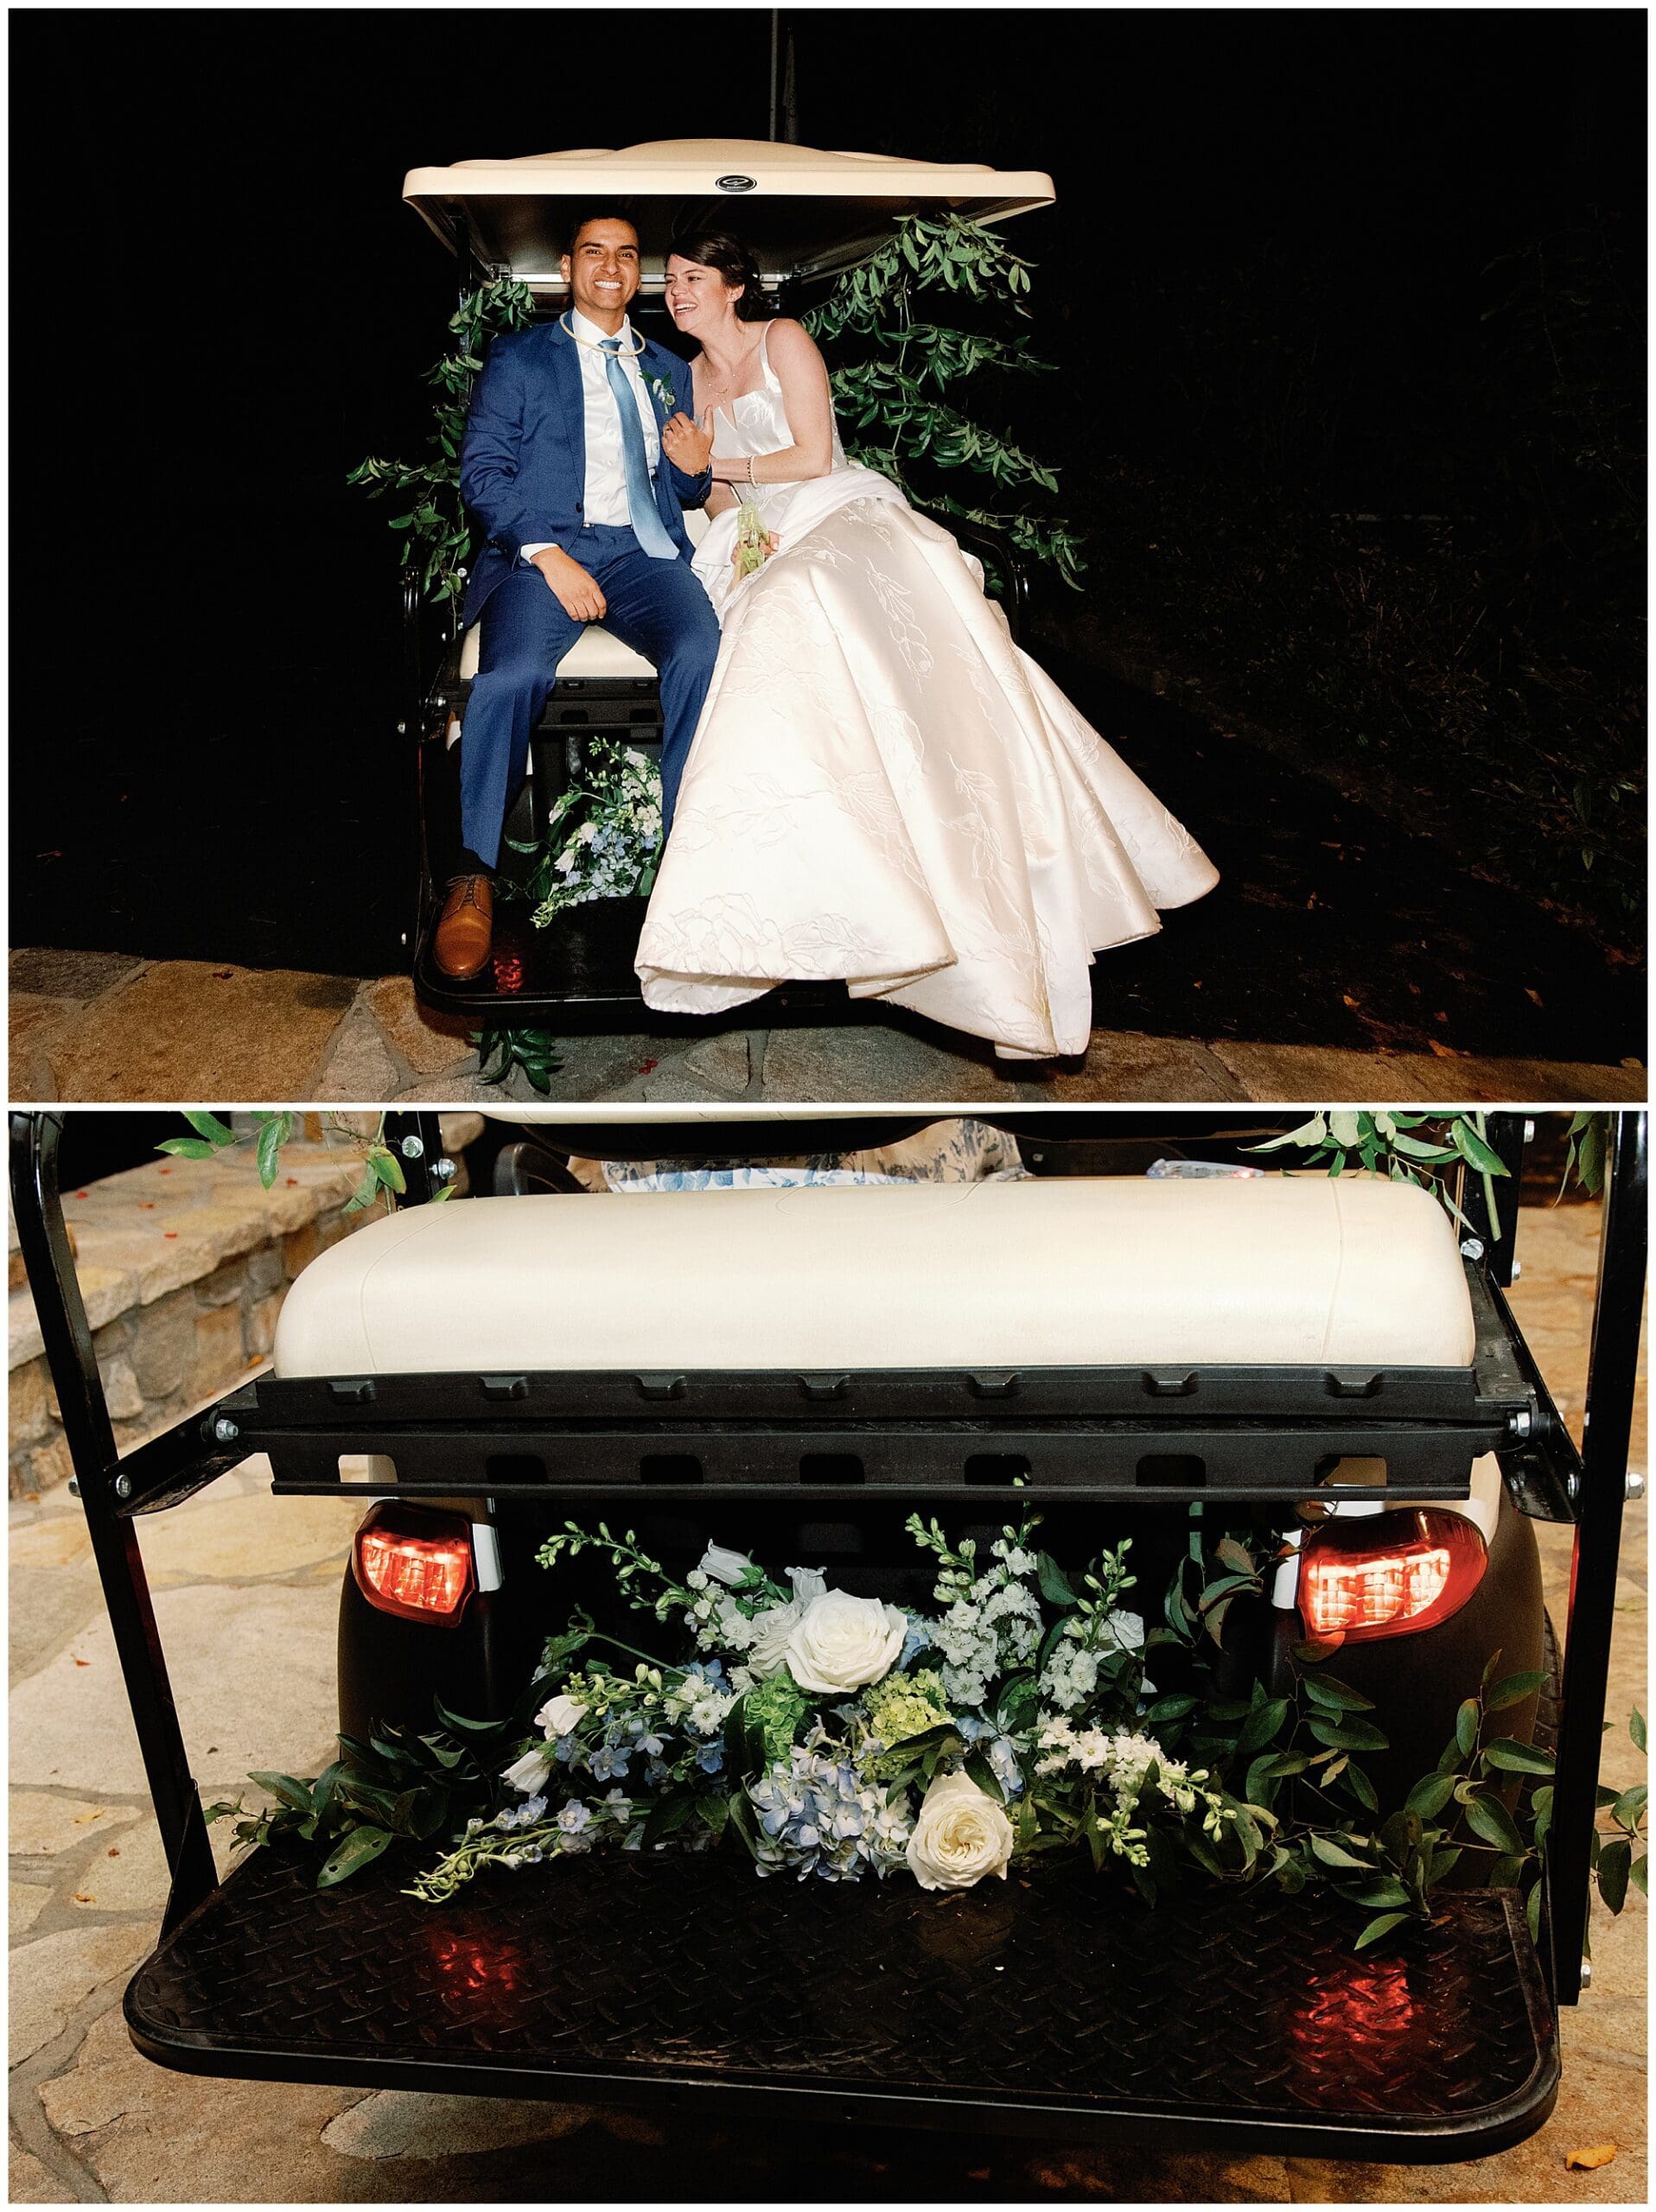 A bride and groom sitting in a golf cart at night.